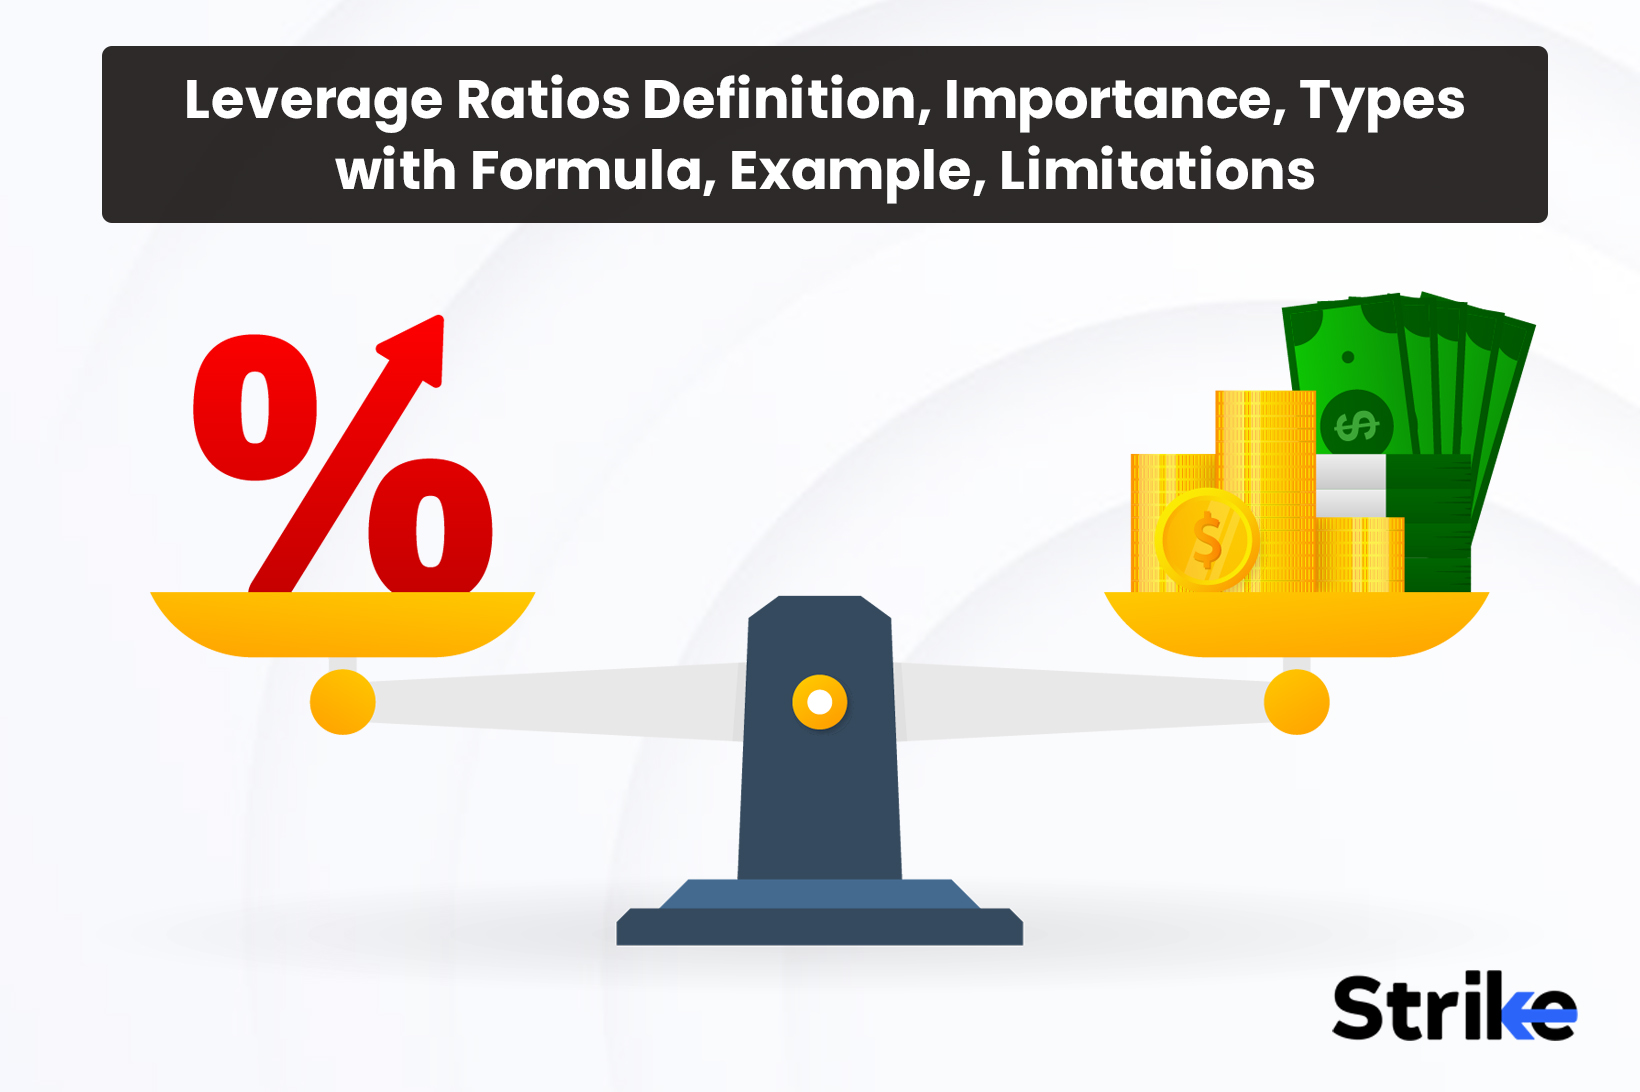 Leverage Ratio: Definition, Importance, Types with Formula, Example, Limitations